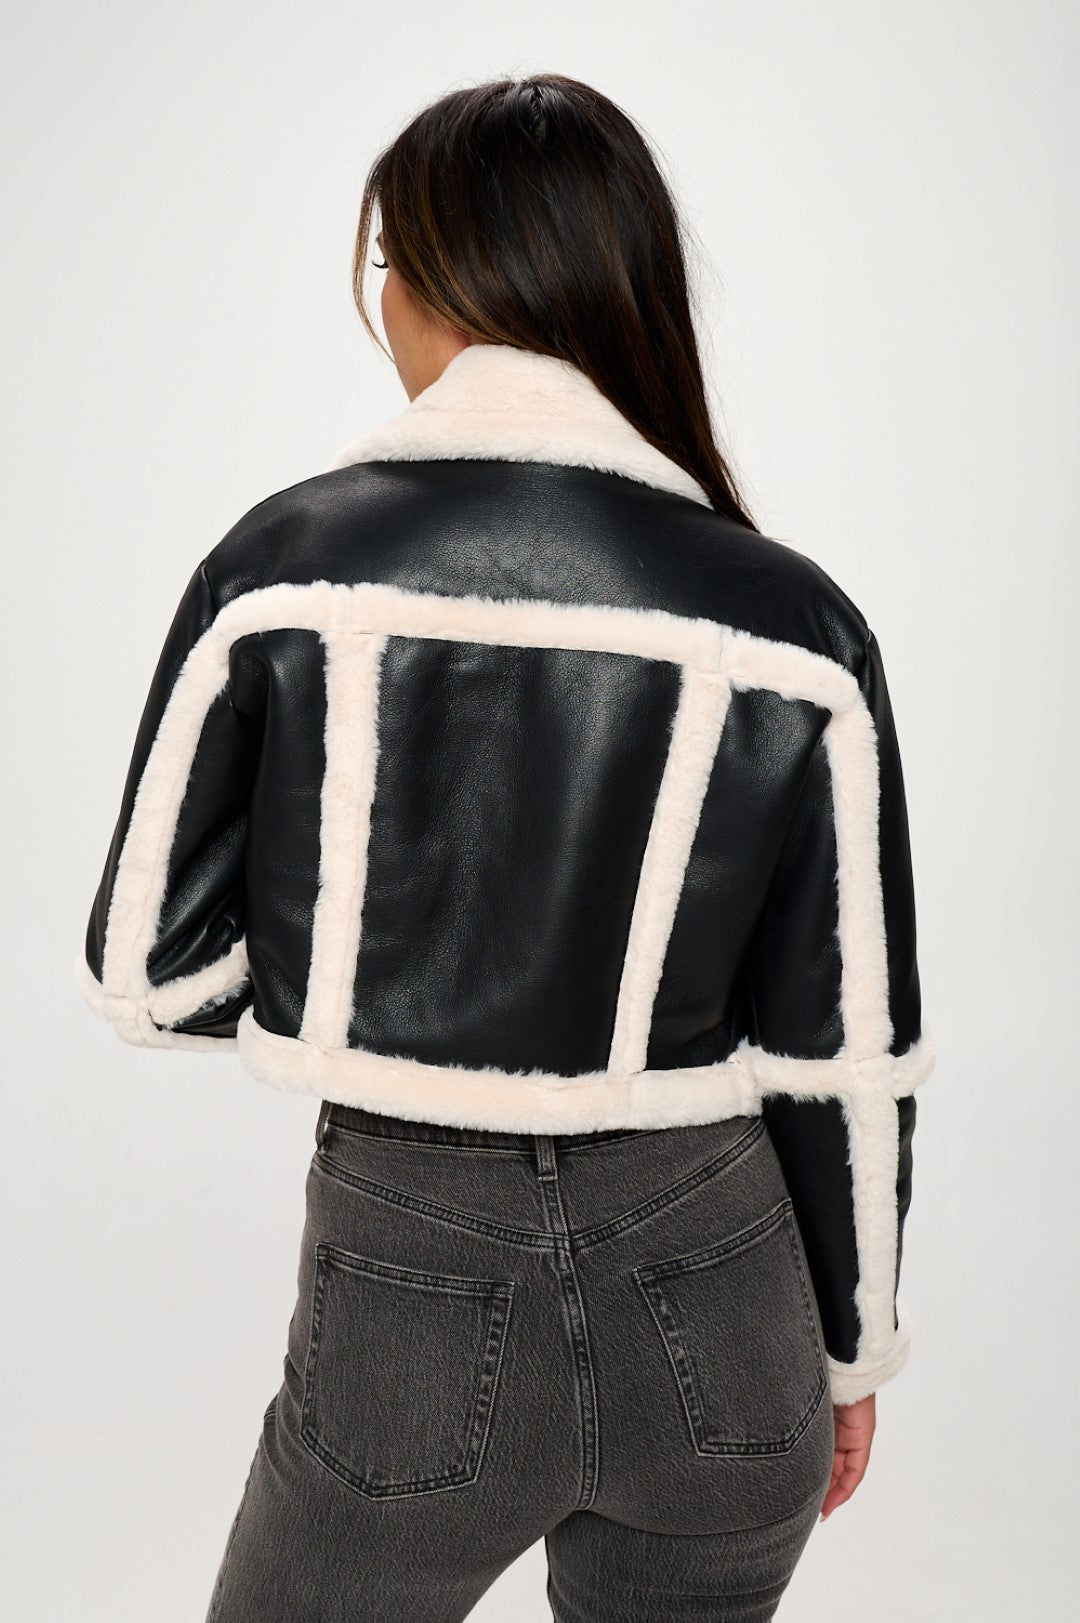 “Goonica” Cropped Faux Leather Jacket